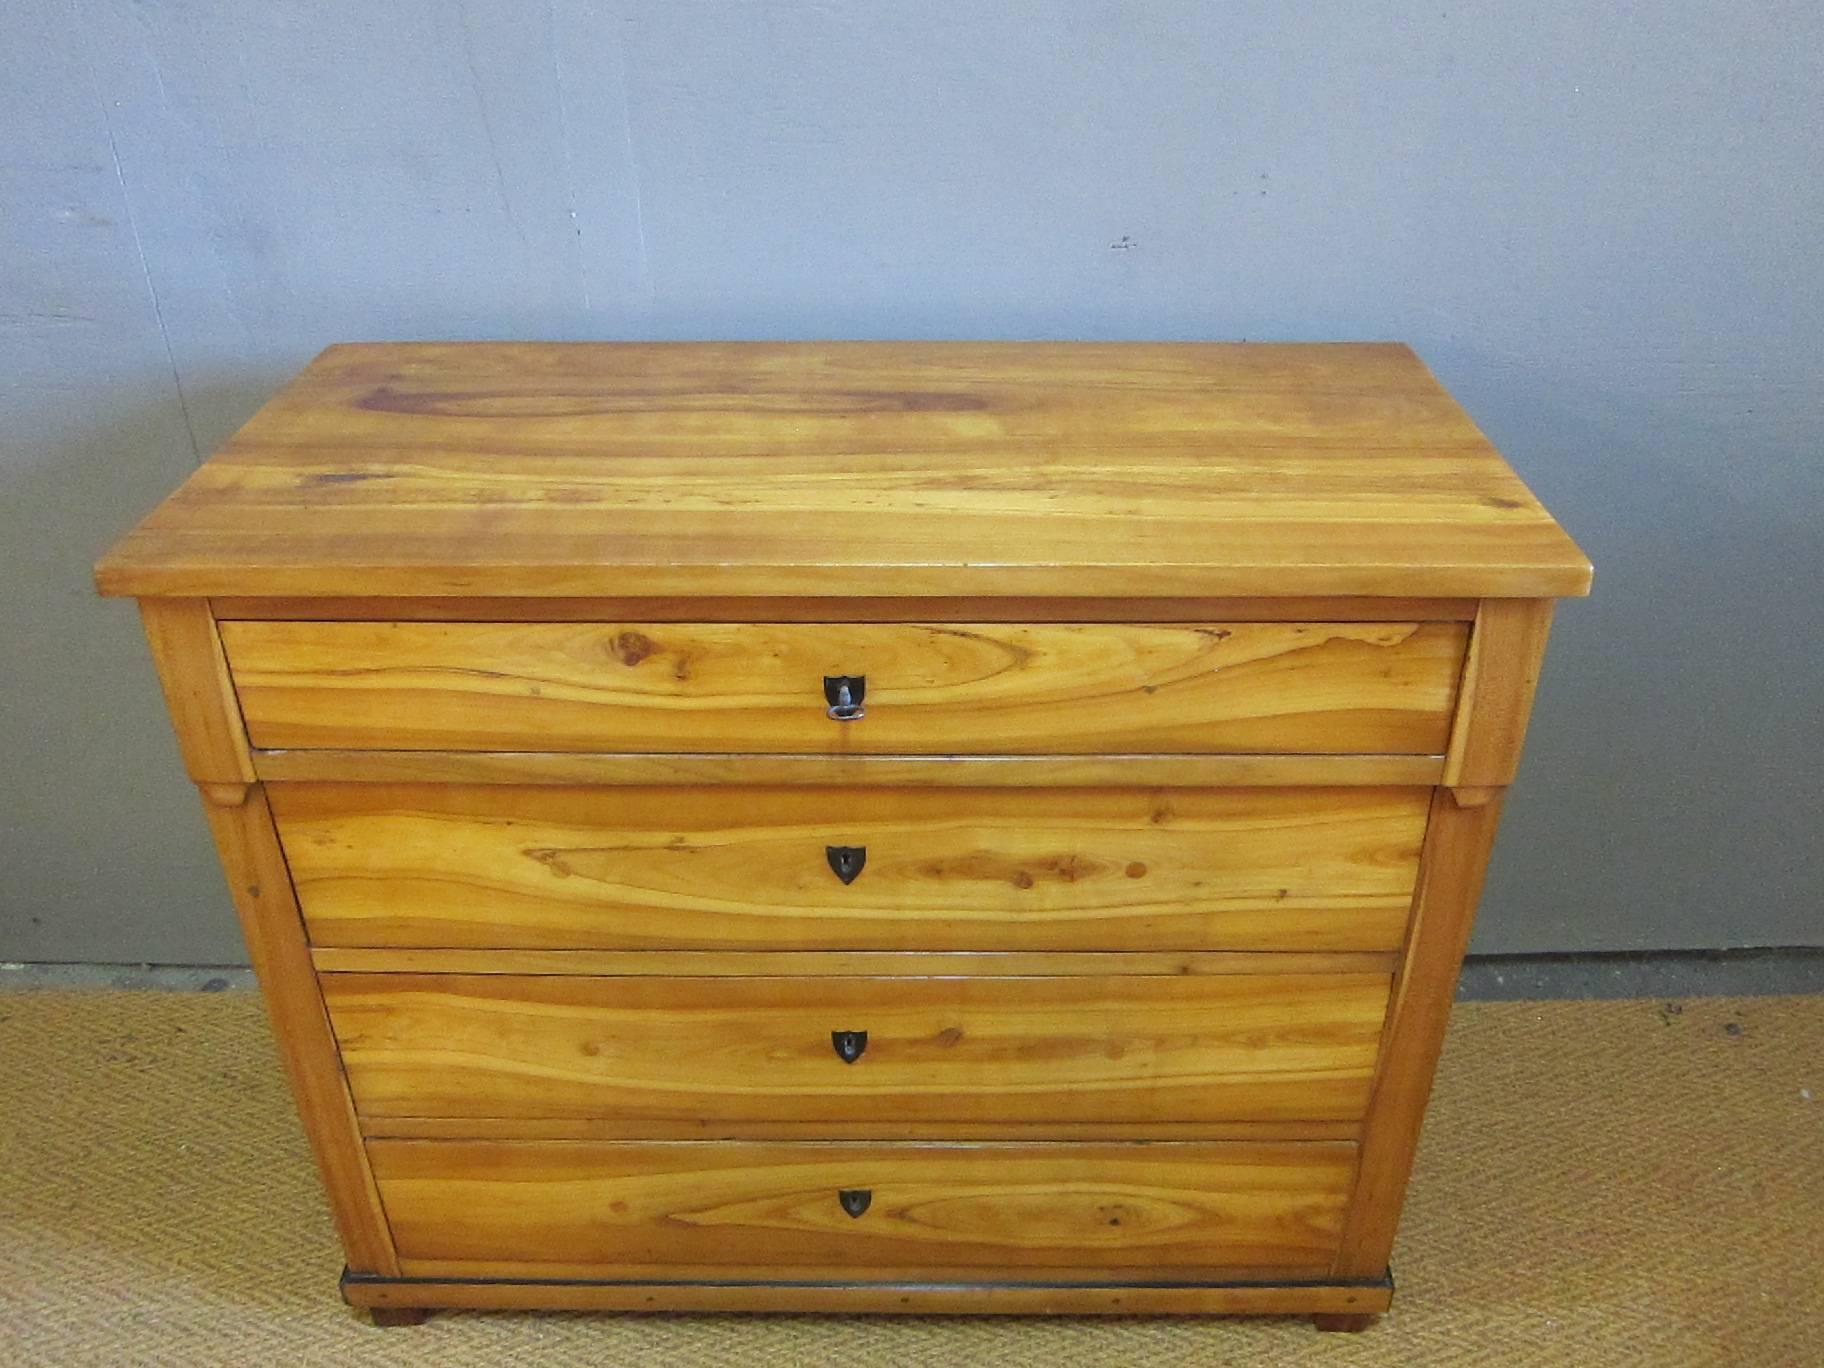 Period Biedermeier chest of drawers. Having four drawers, simple over hang detail to top frame on block feet. Cherry veneer over northern pine (pinotea), drawer fronts having buffalo horn escutcheons with working locks. Drawers exhibit plugged holes